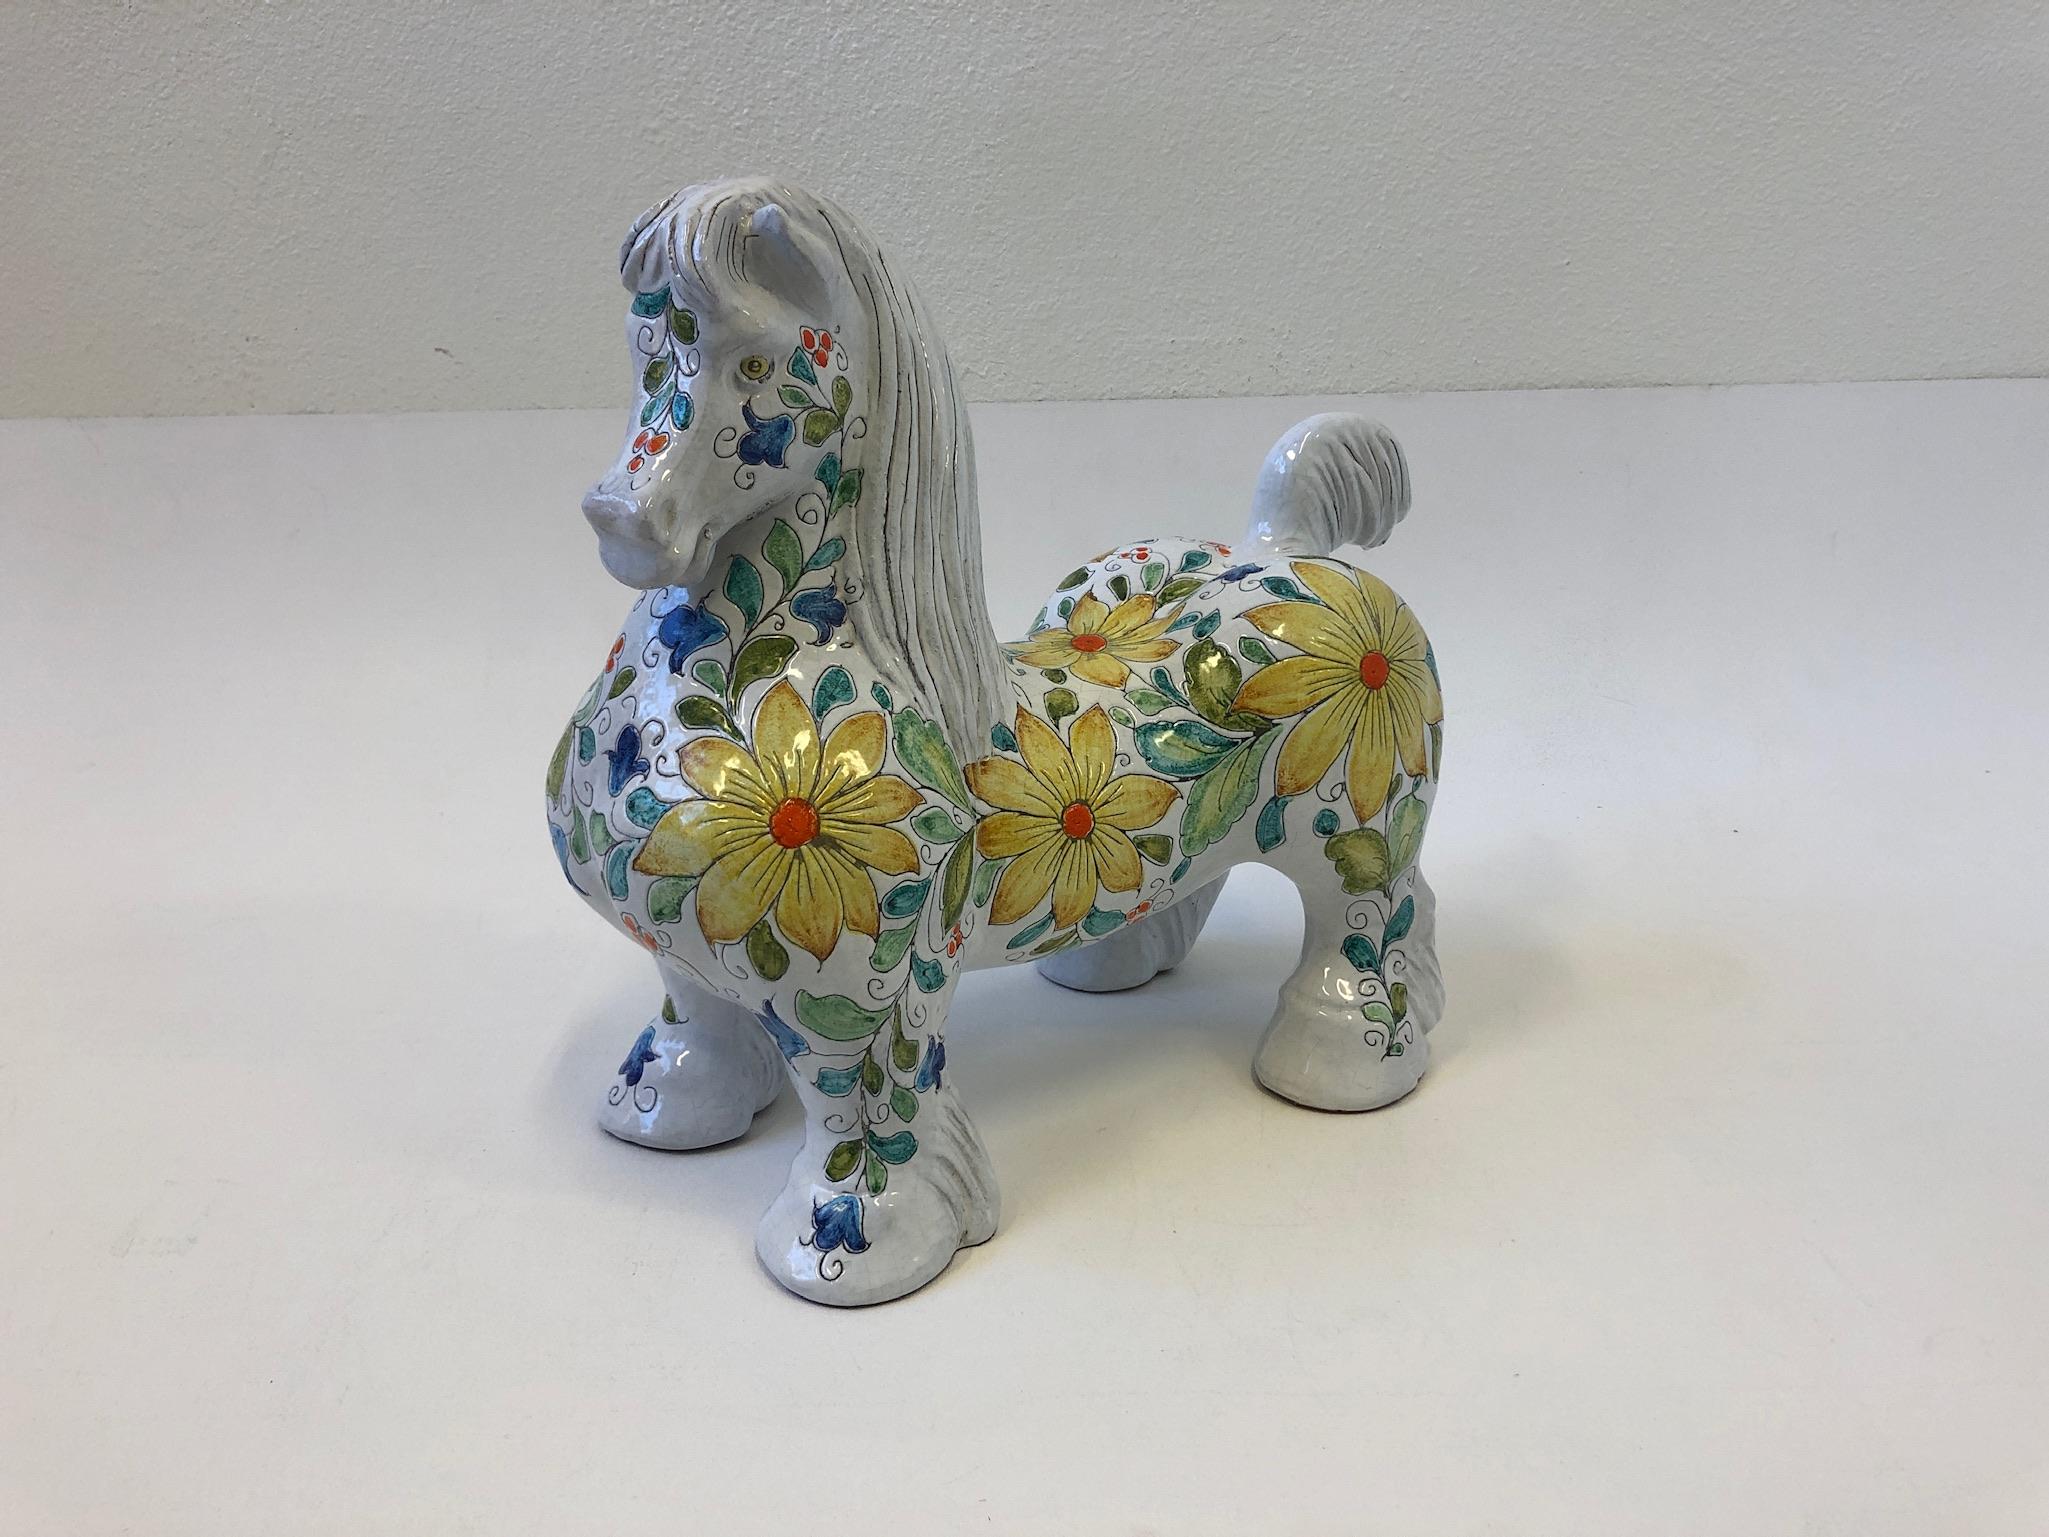 A beautiful 1970s Italian glazed terracotta horse sculpture by Mancioli for Raymor. The horse is hand painted with flowers all around and it’s marked made in Italy.
Overall dimensions: 18” wide, 7” deep, 16” high.